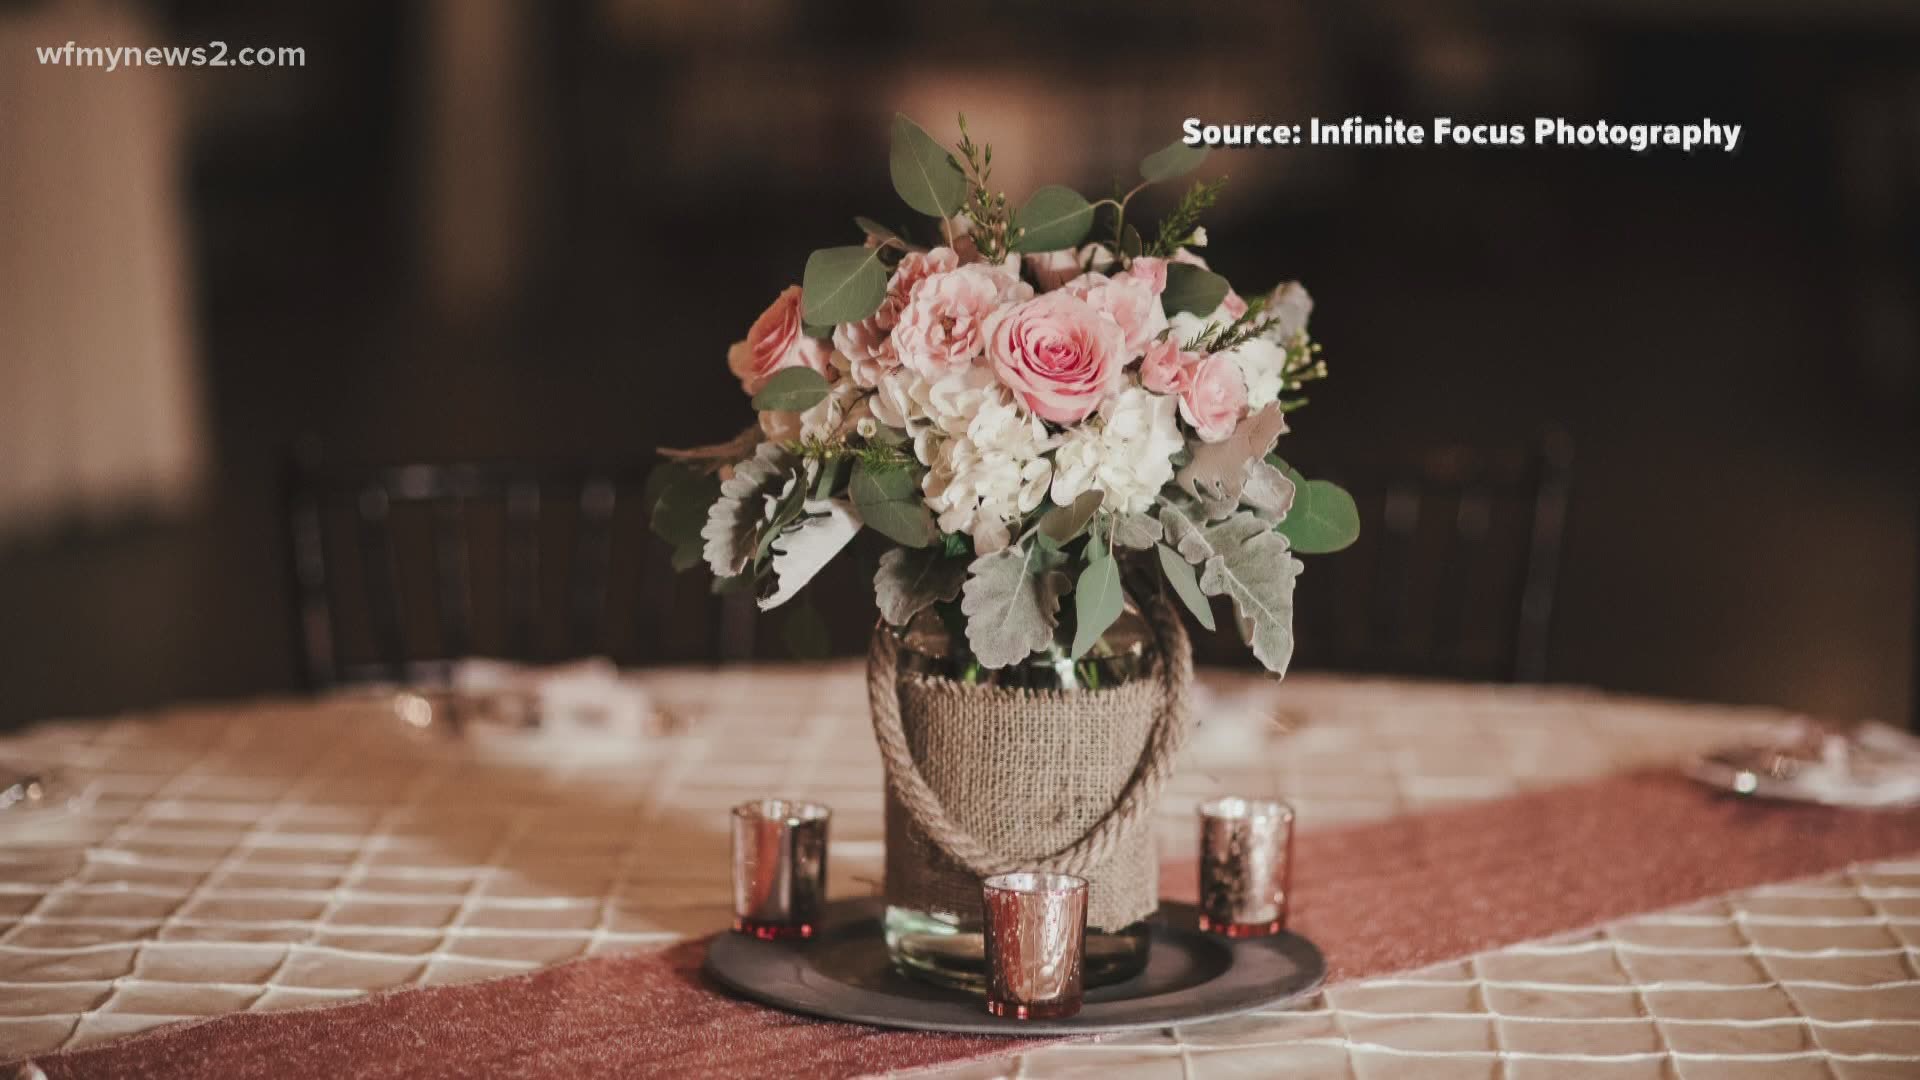 As Mother’s Day approaches and more weddings are happening with eased restrictions, florists around the Triad are seeing a huge increase in business.